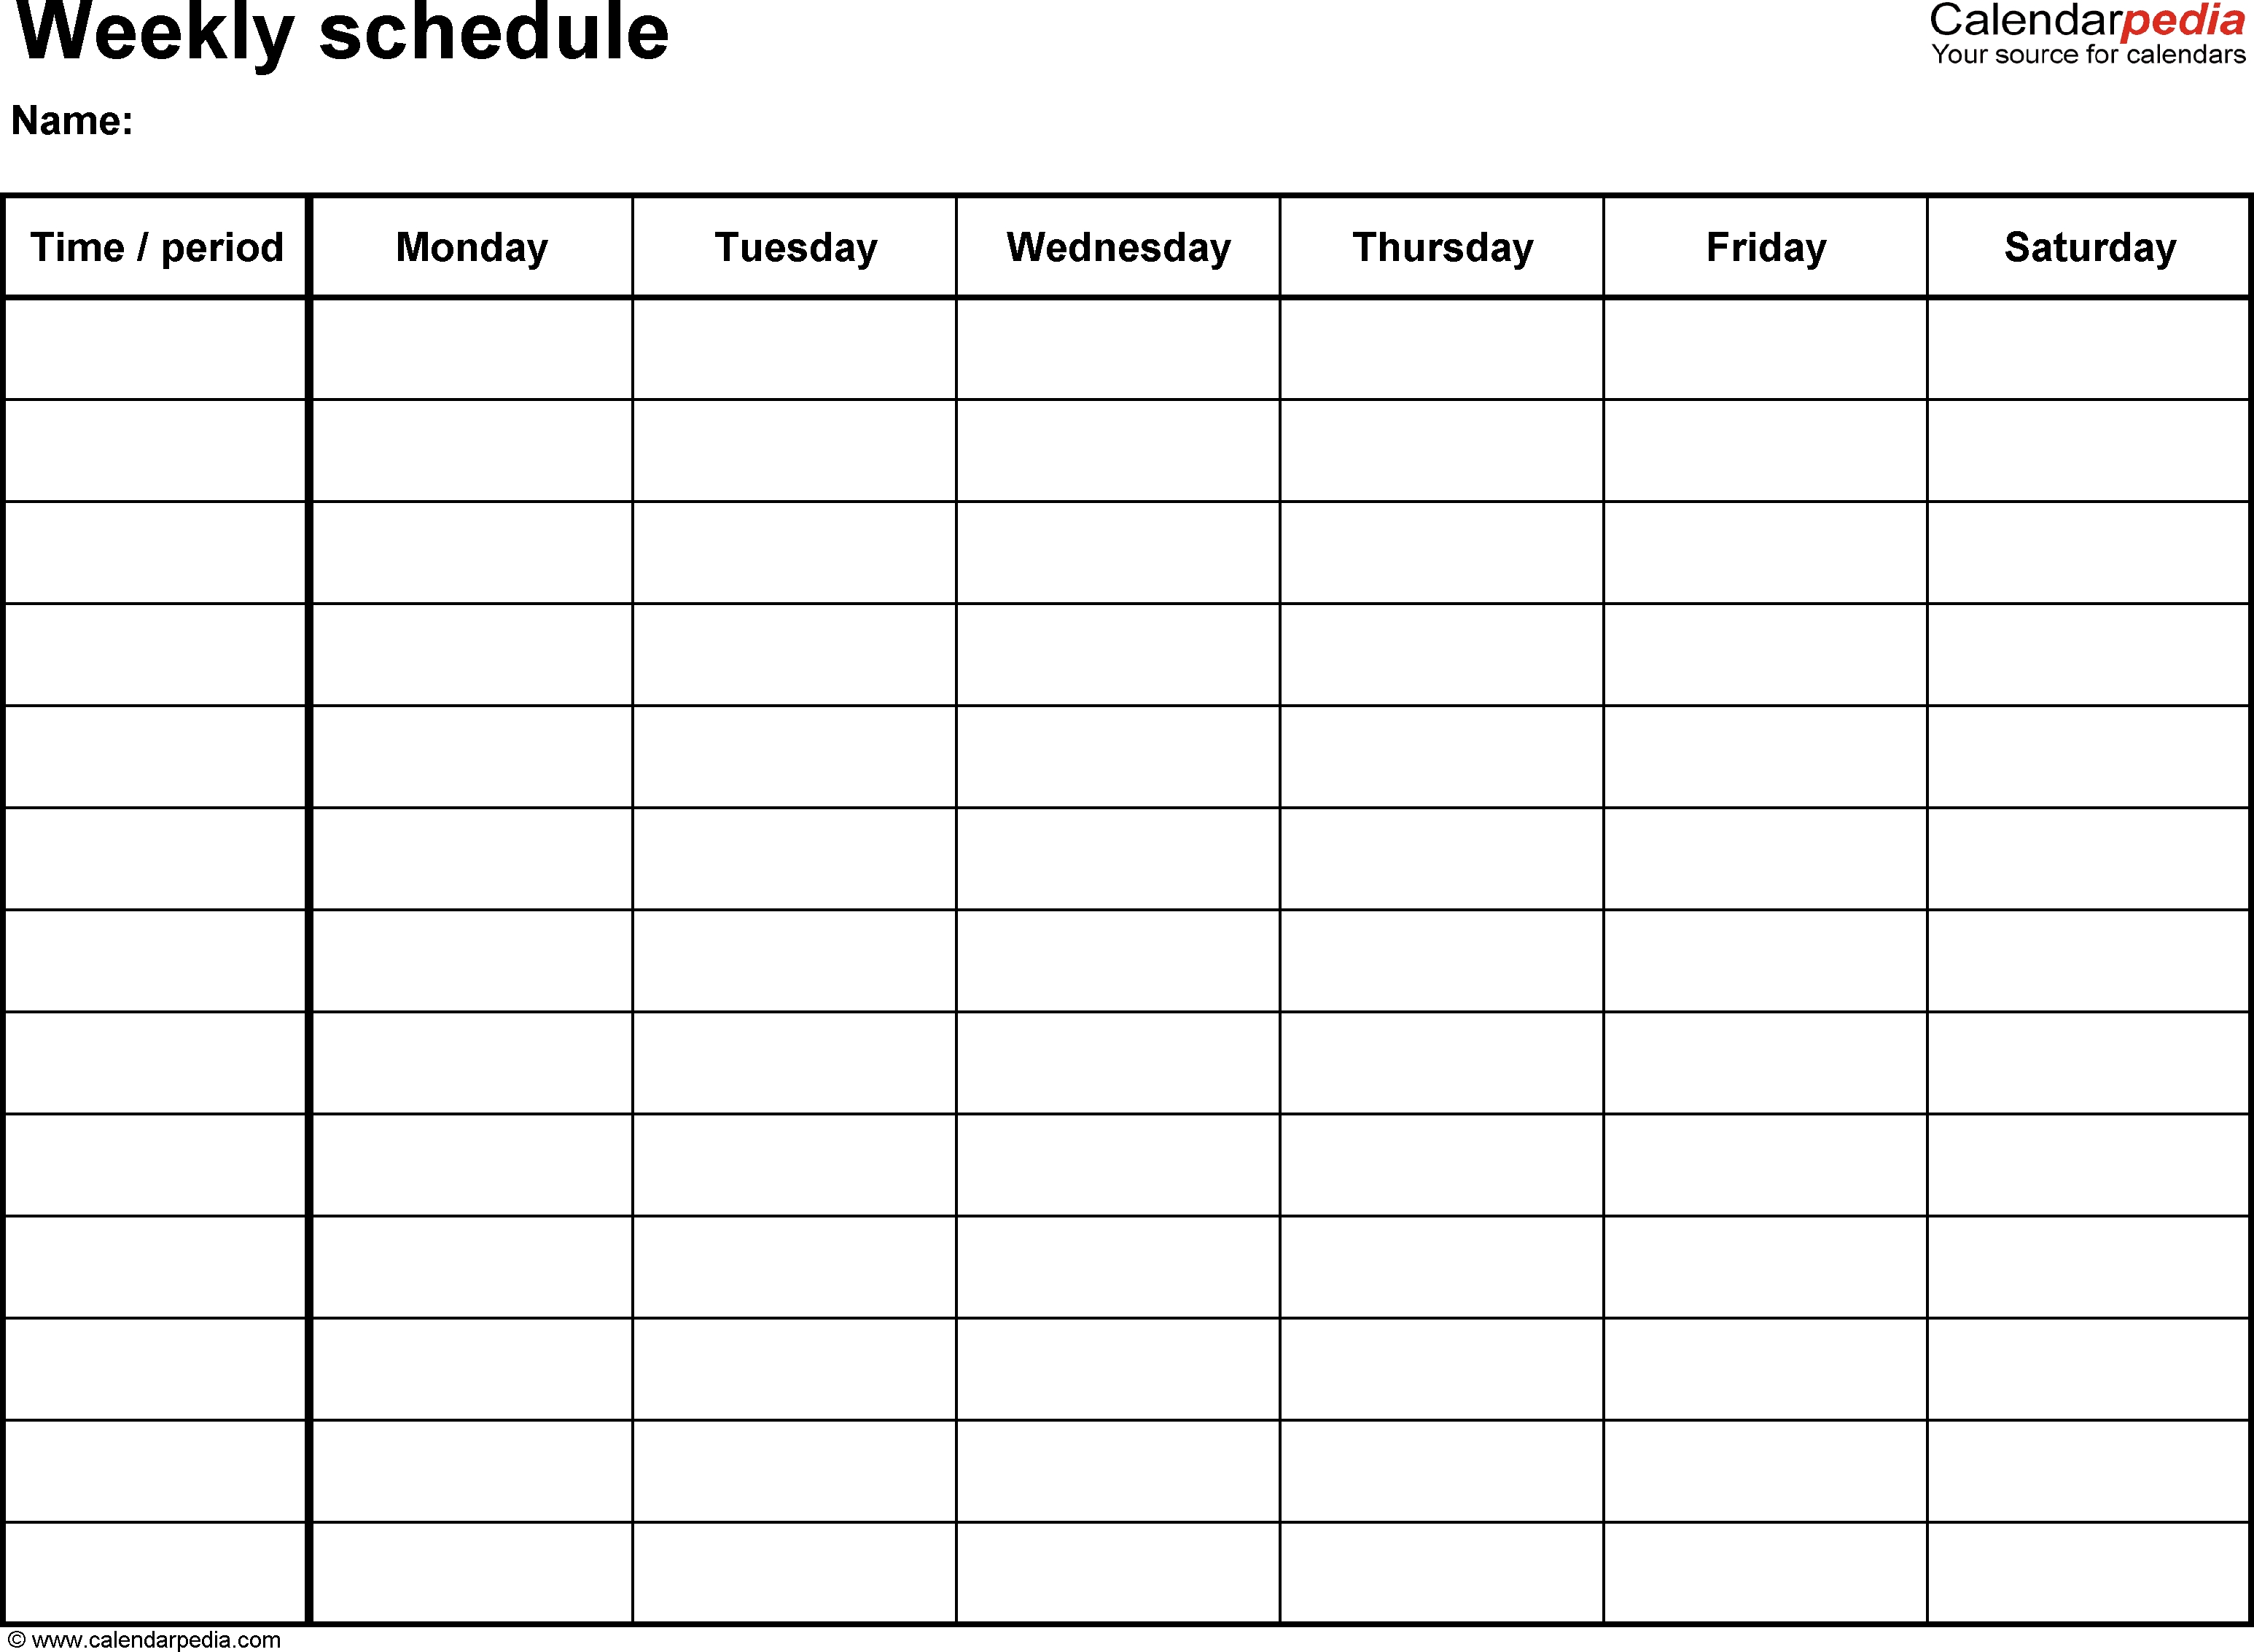 Free Weekly Schedule Templates For Excel - 18 Templates-Blank Calendar No Dates